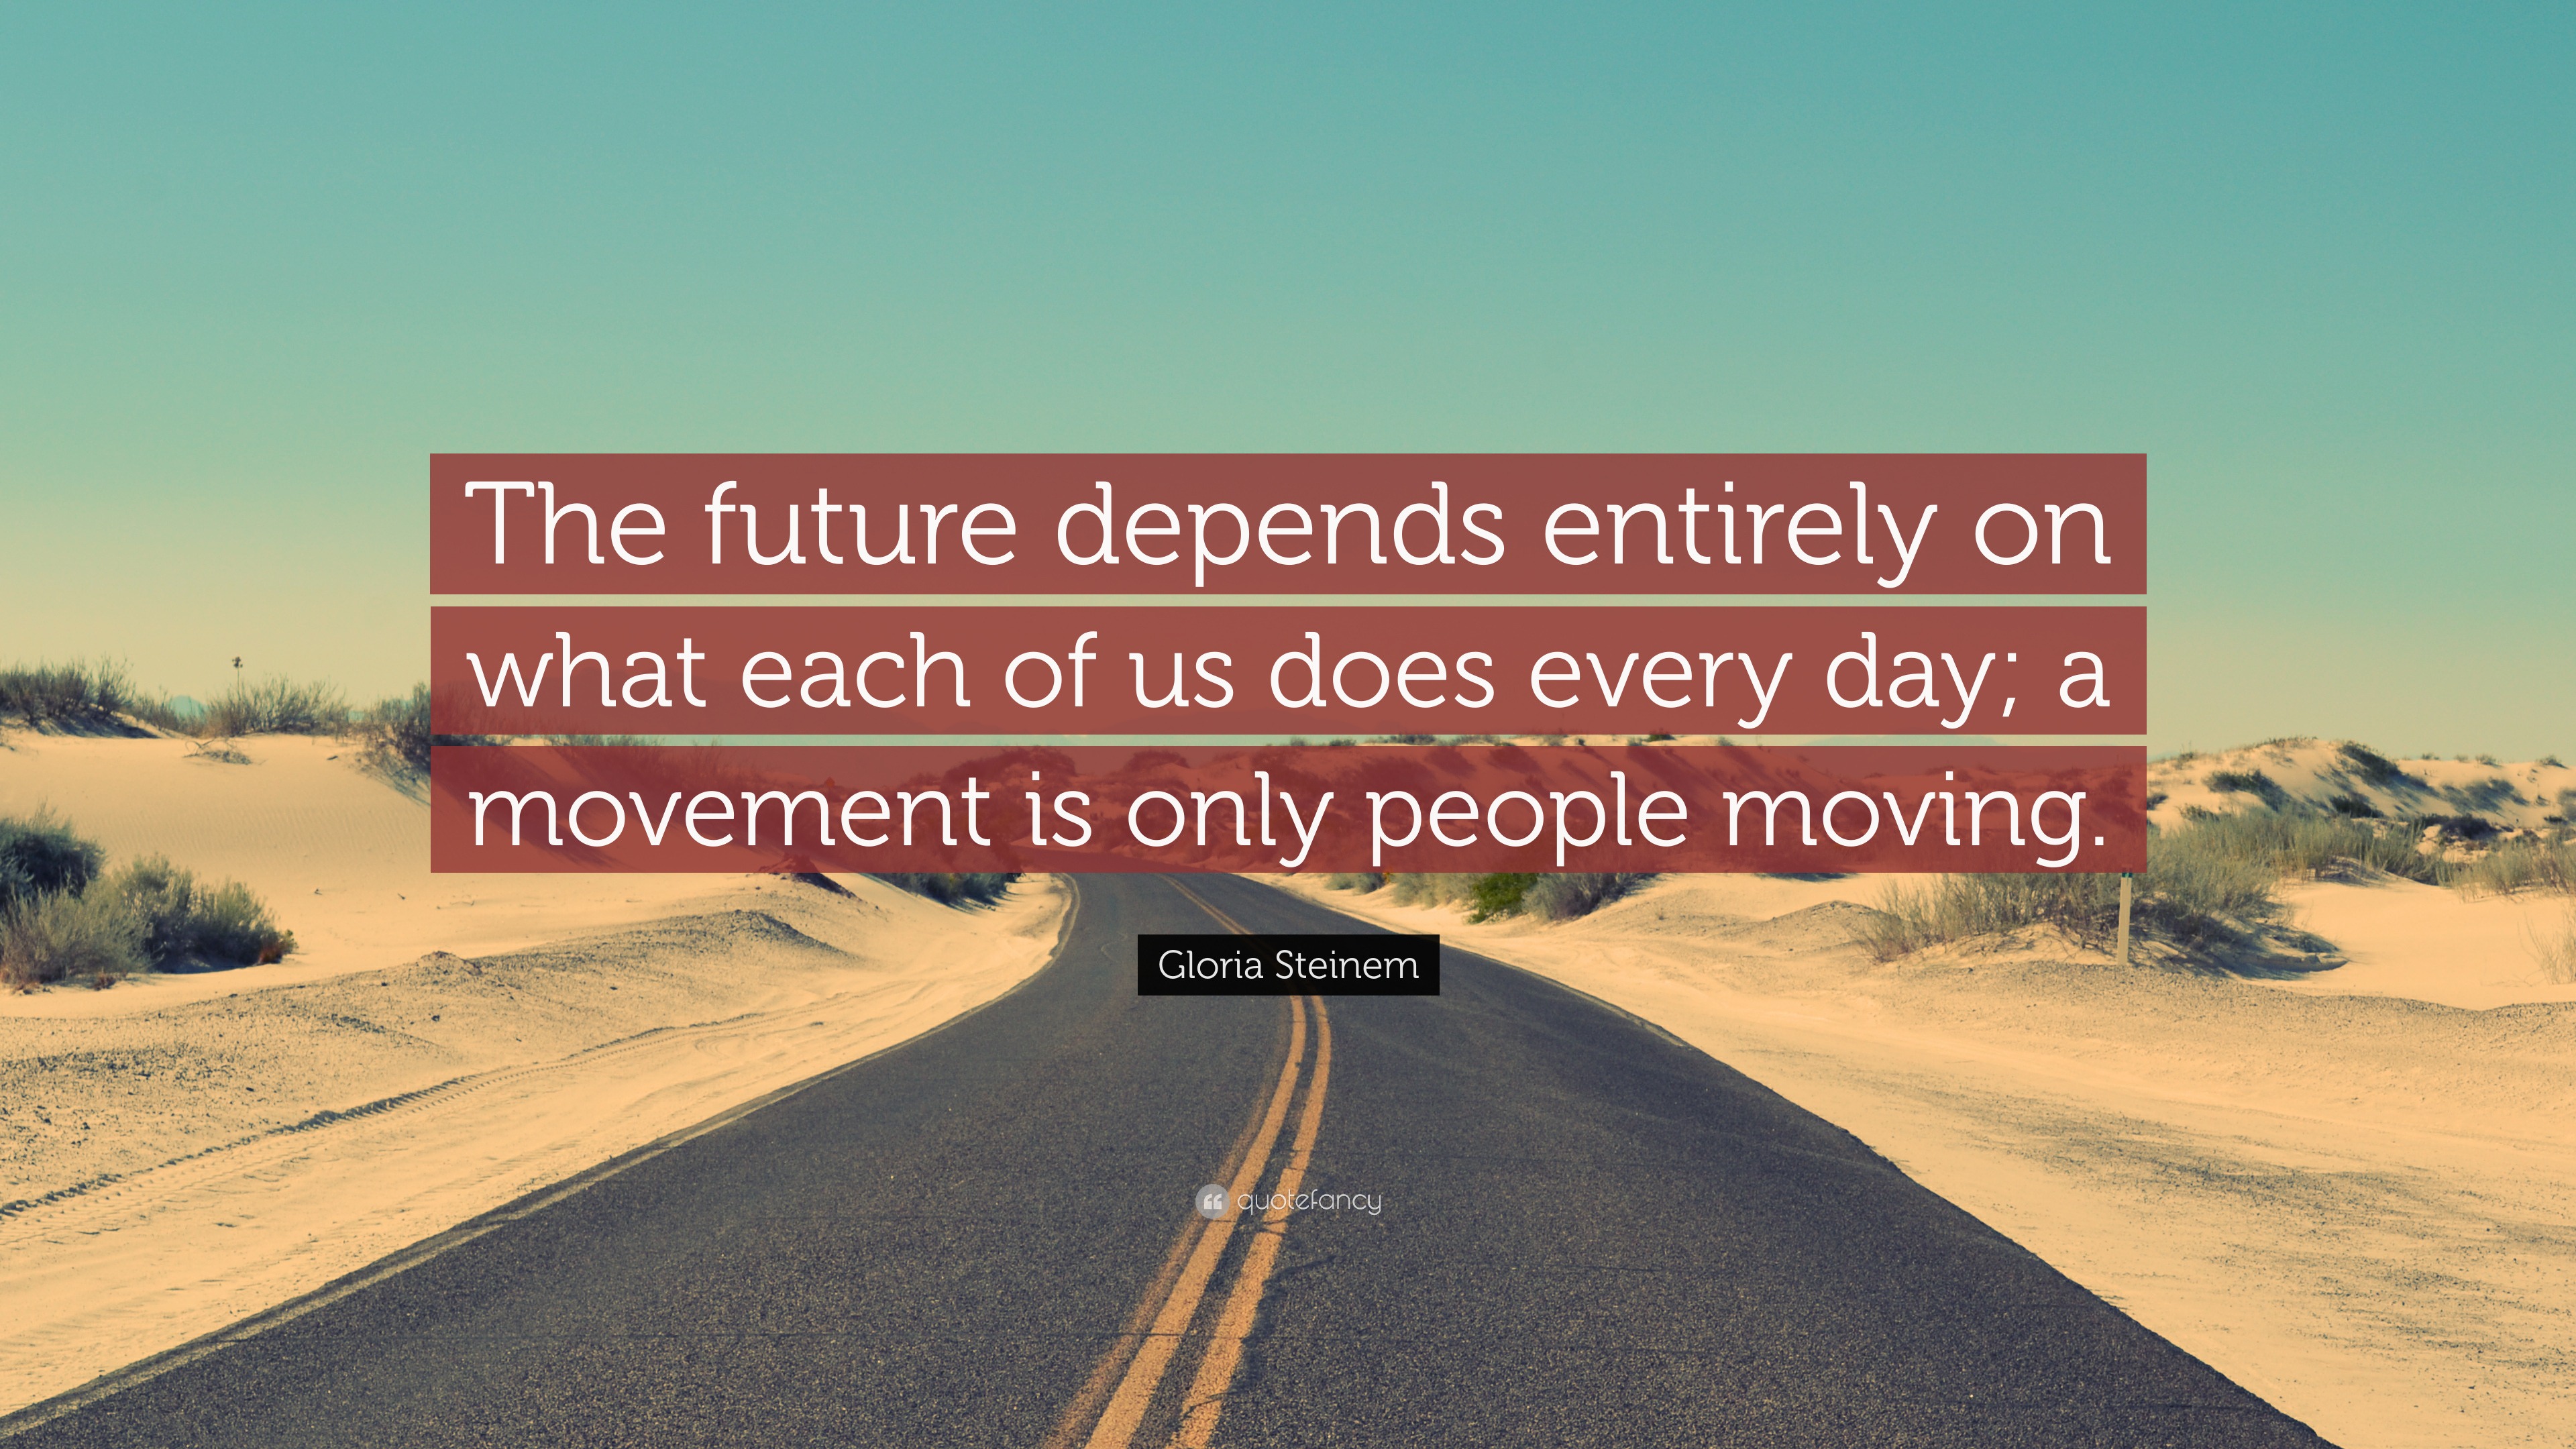 Gloria Steinem Quote: “The future depends entirely on what each of us ...